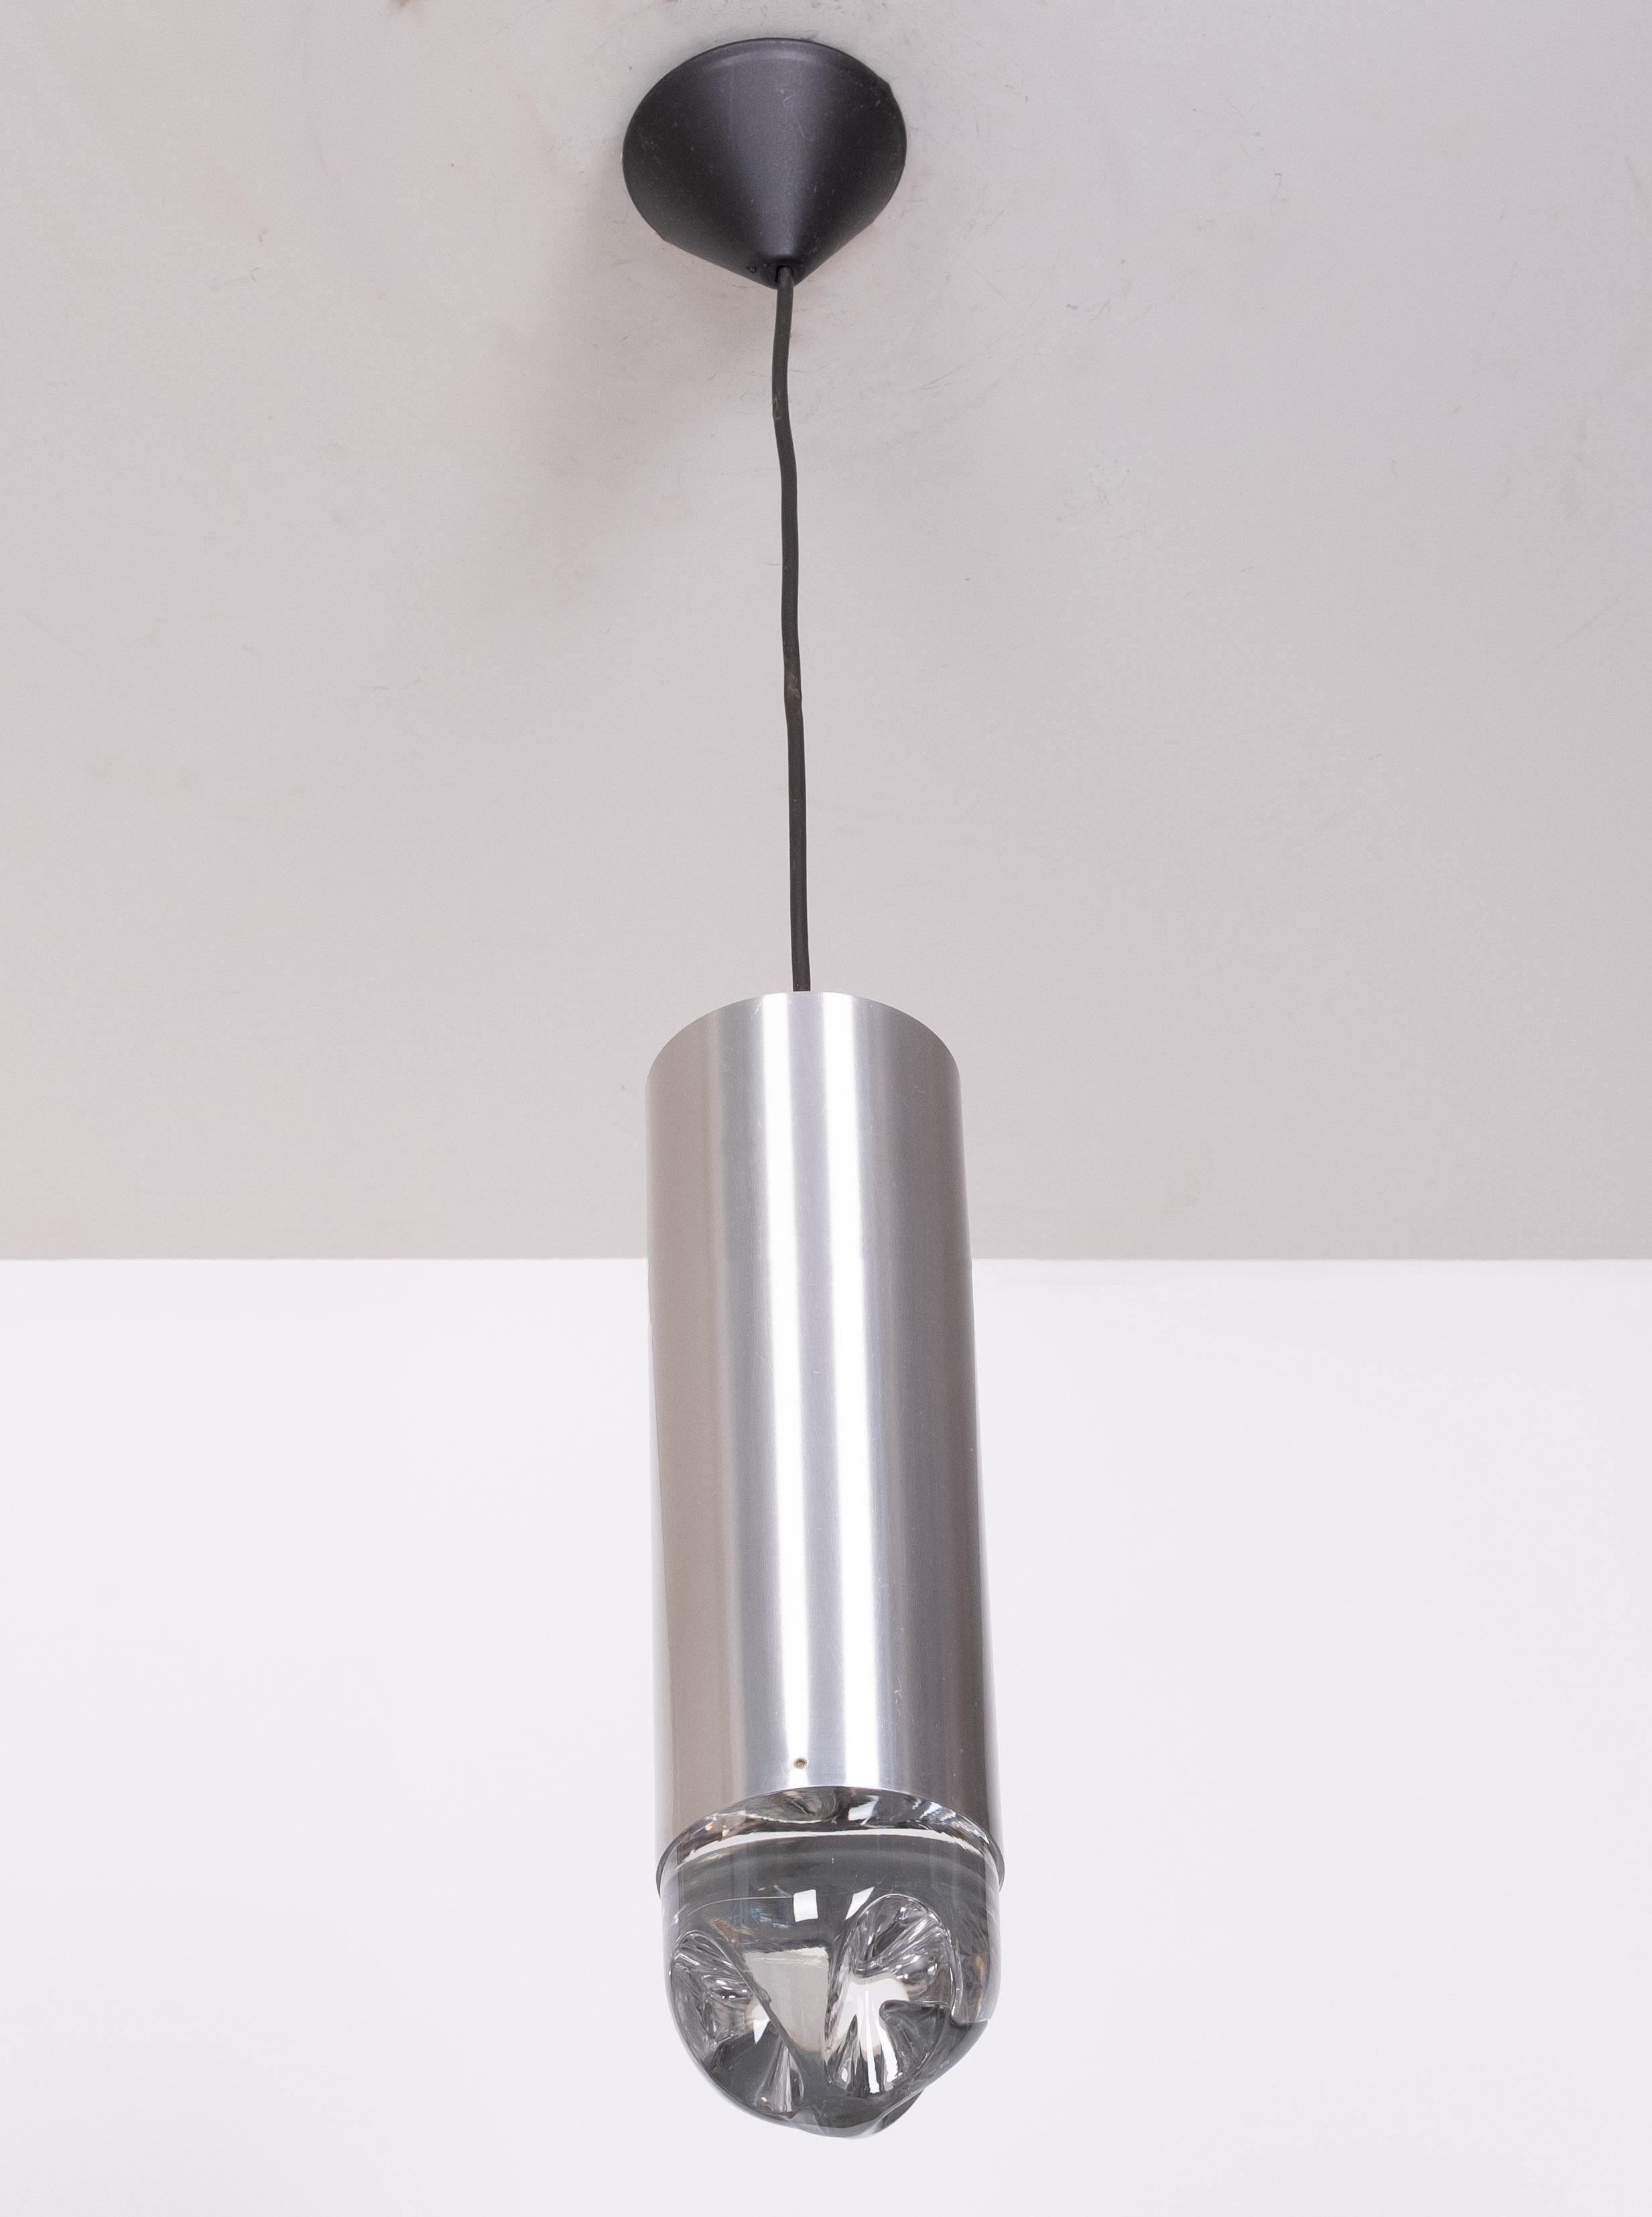 Raak Amsterdam Bullet pendant lamp . Aluminum cylinder .
comes with A solid crystal Glass shade .  This is the largest one they made .
1960s Holland 